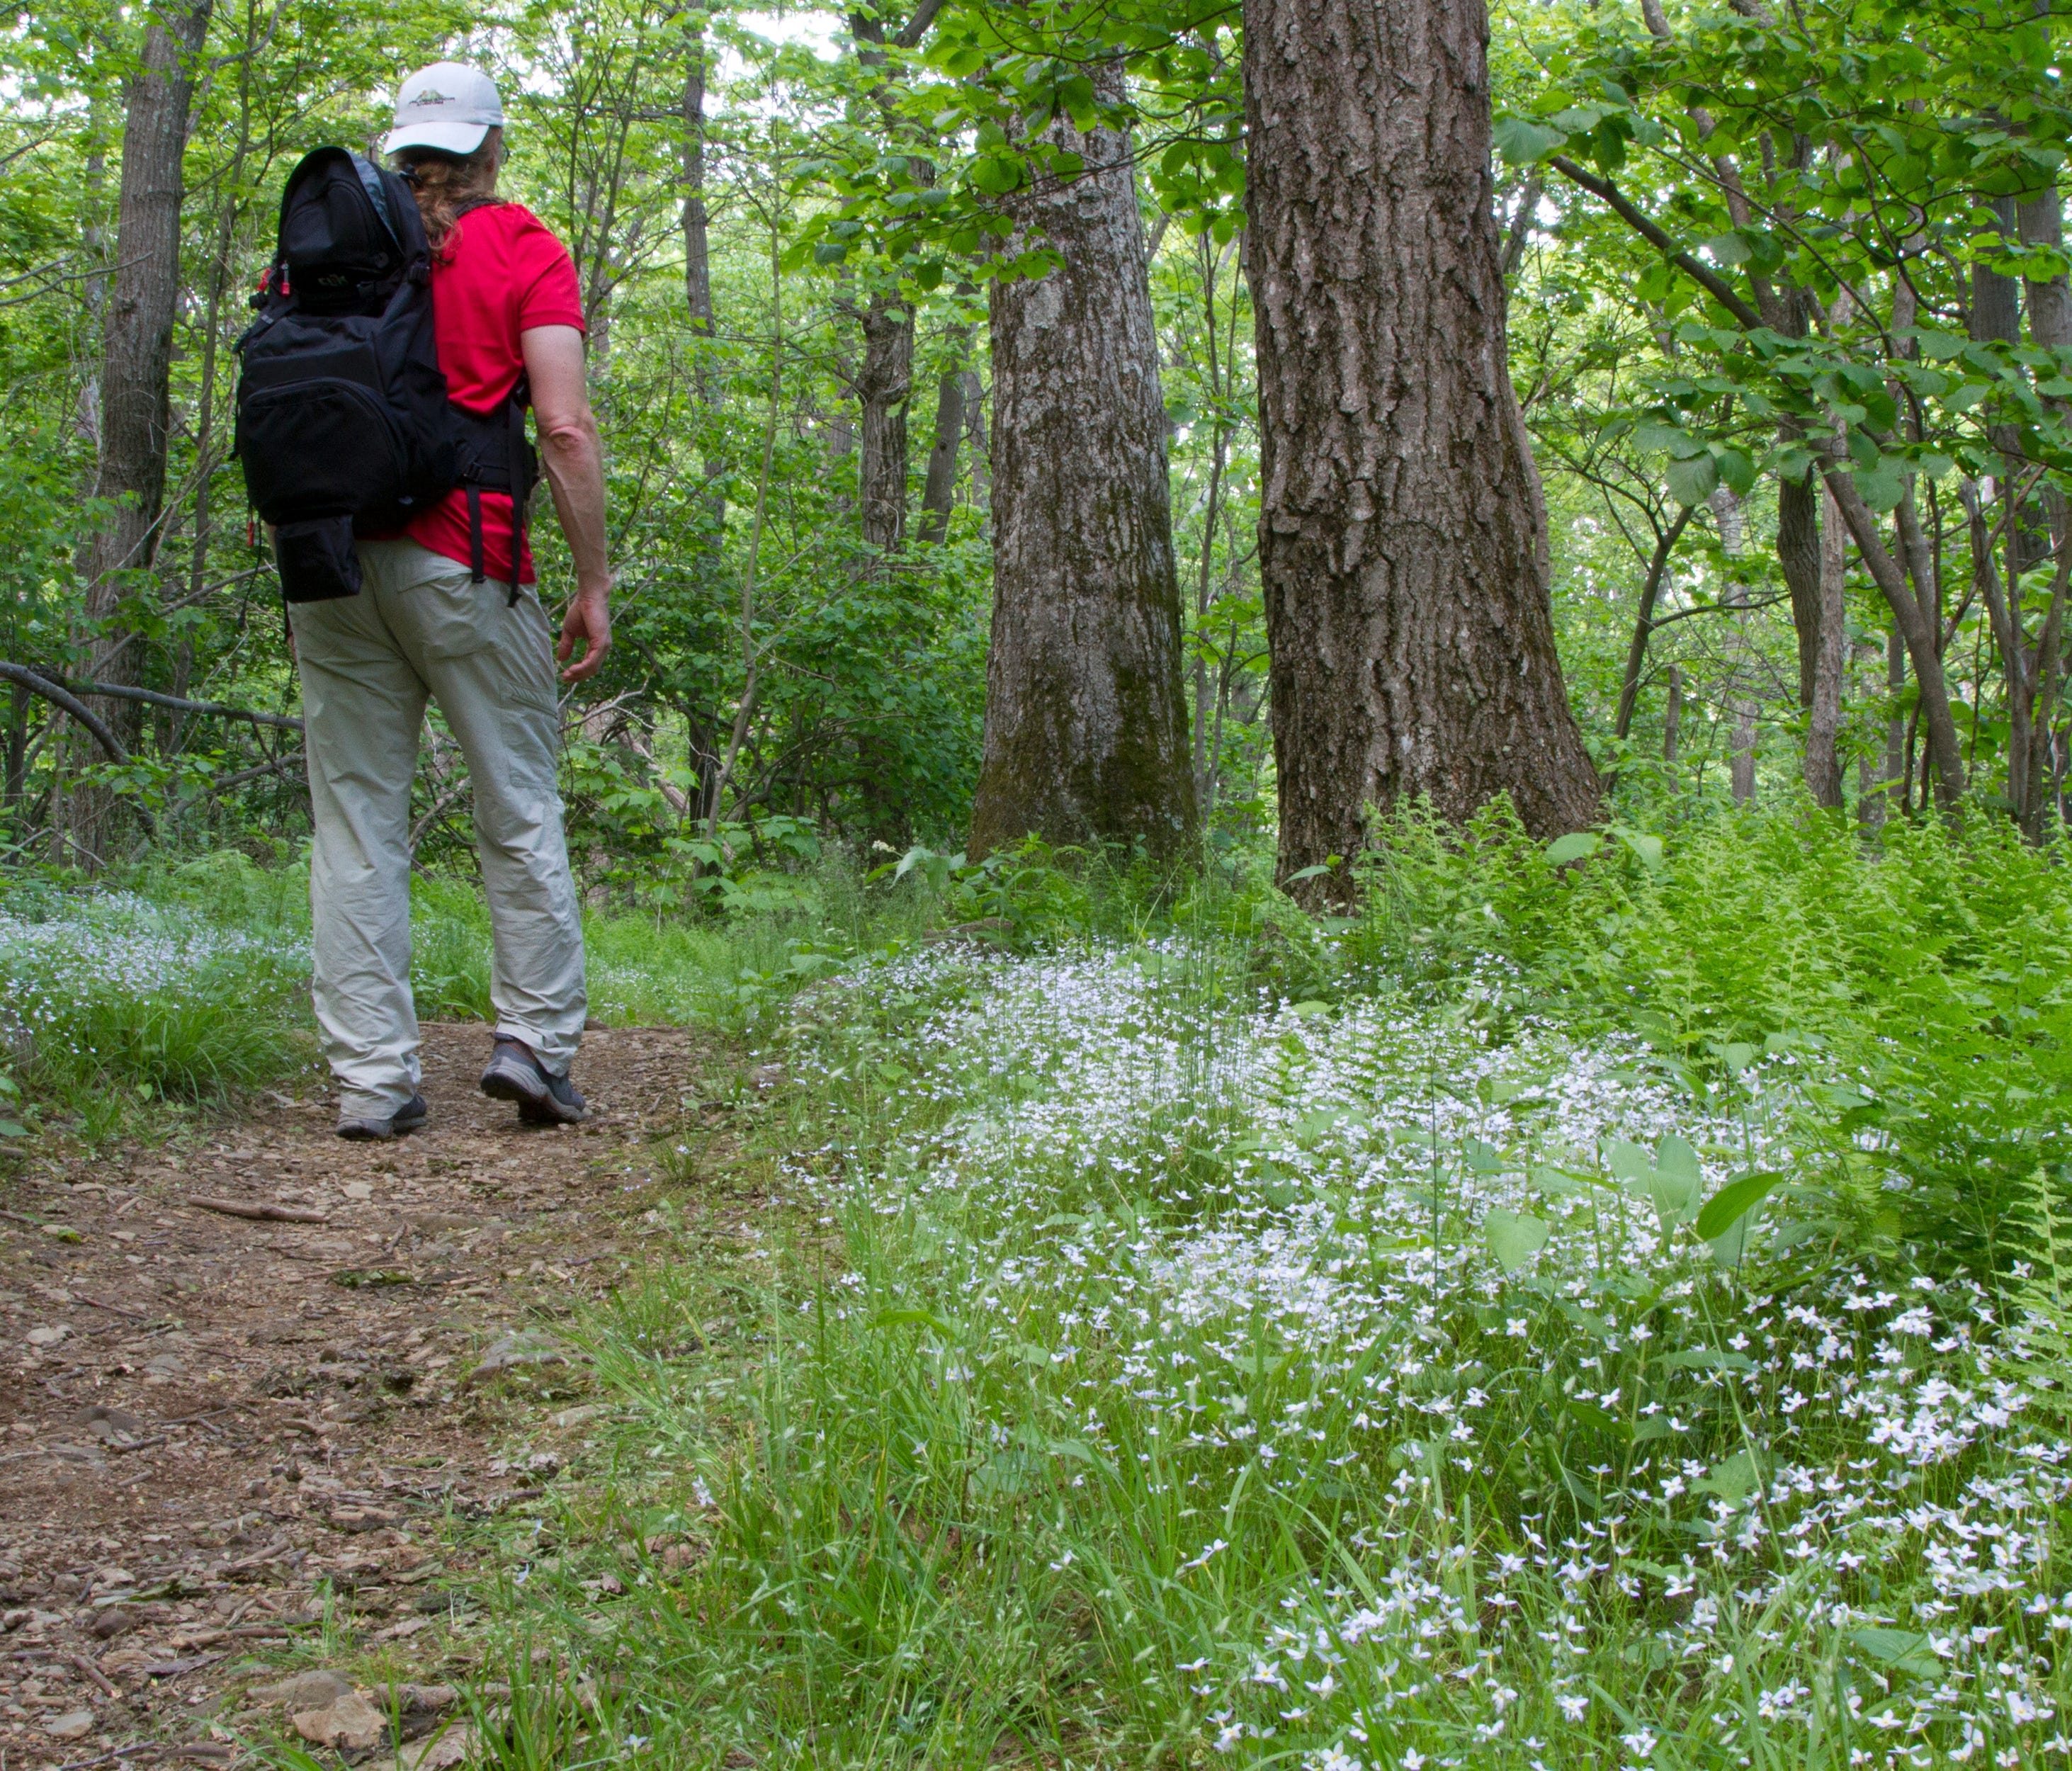 With more than 500 hiking trails criss-crossing the park, including just over 100 miles of the Appalachian Trail, there are plenty of hiking opportunities for all abilities and timeframes.